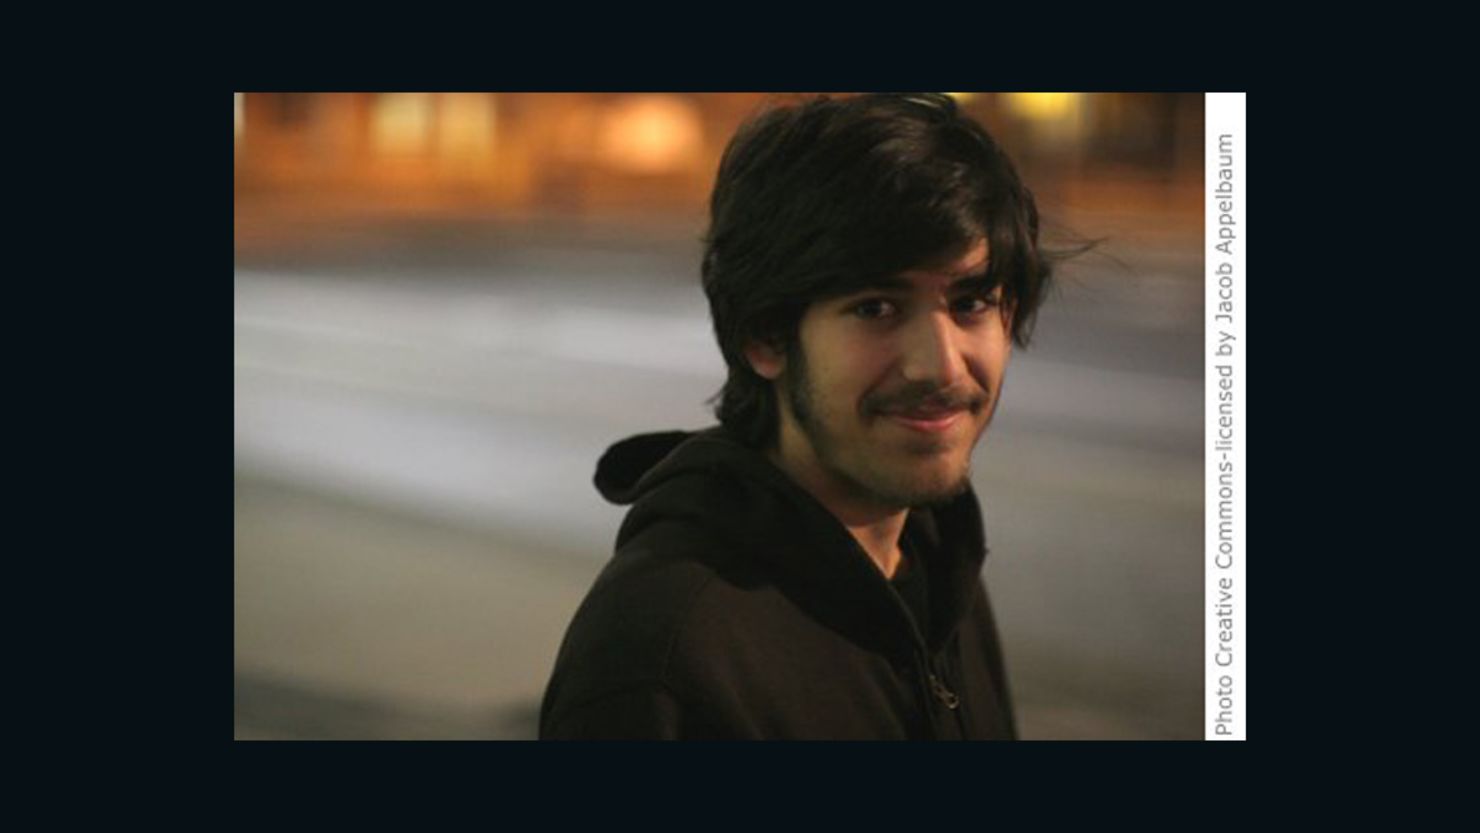 Reddit co-founder Aaron Swartz fought for Web freedoms but faced charges that he illegally downloaded online documents.